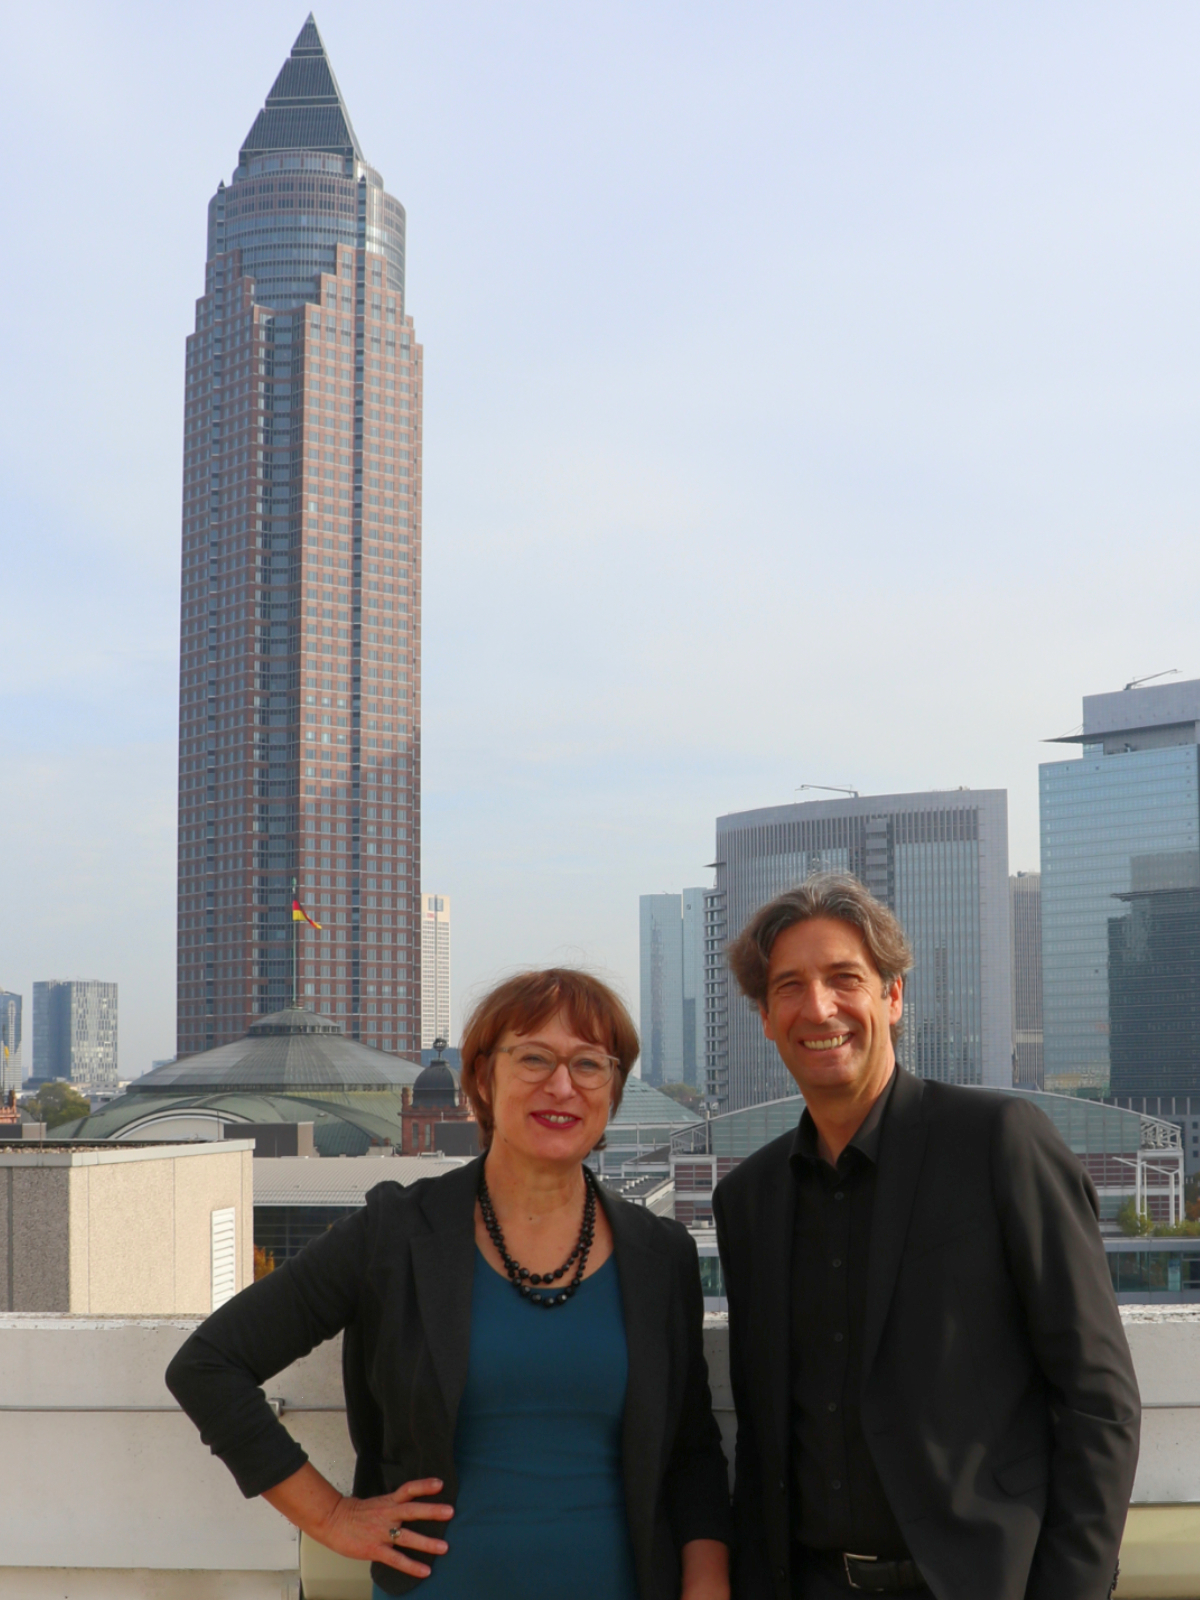 Anja Diete and Frank Duvernell exchange views on 10 years of Cleanzone.